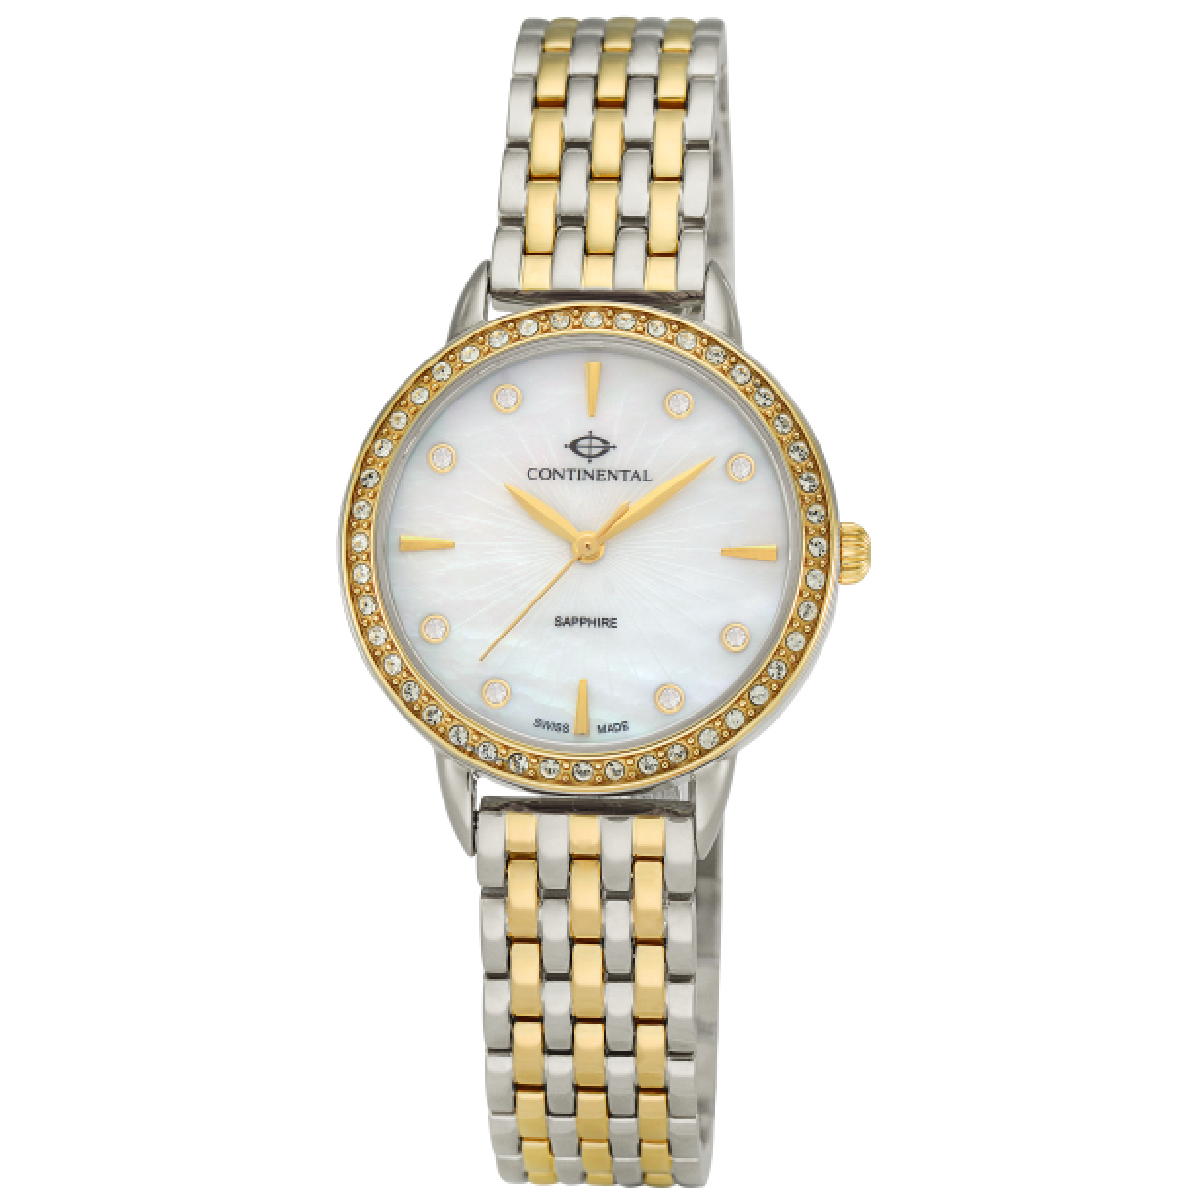 Continental Ladies Dress Watch 17102-LT312501 - front view